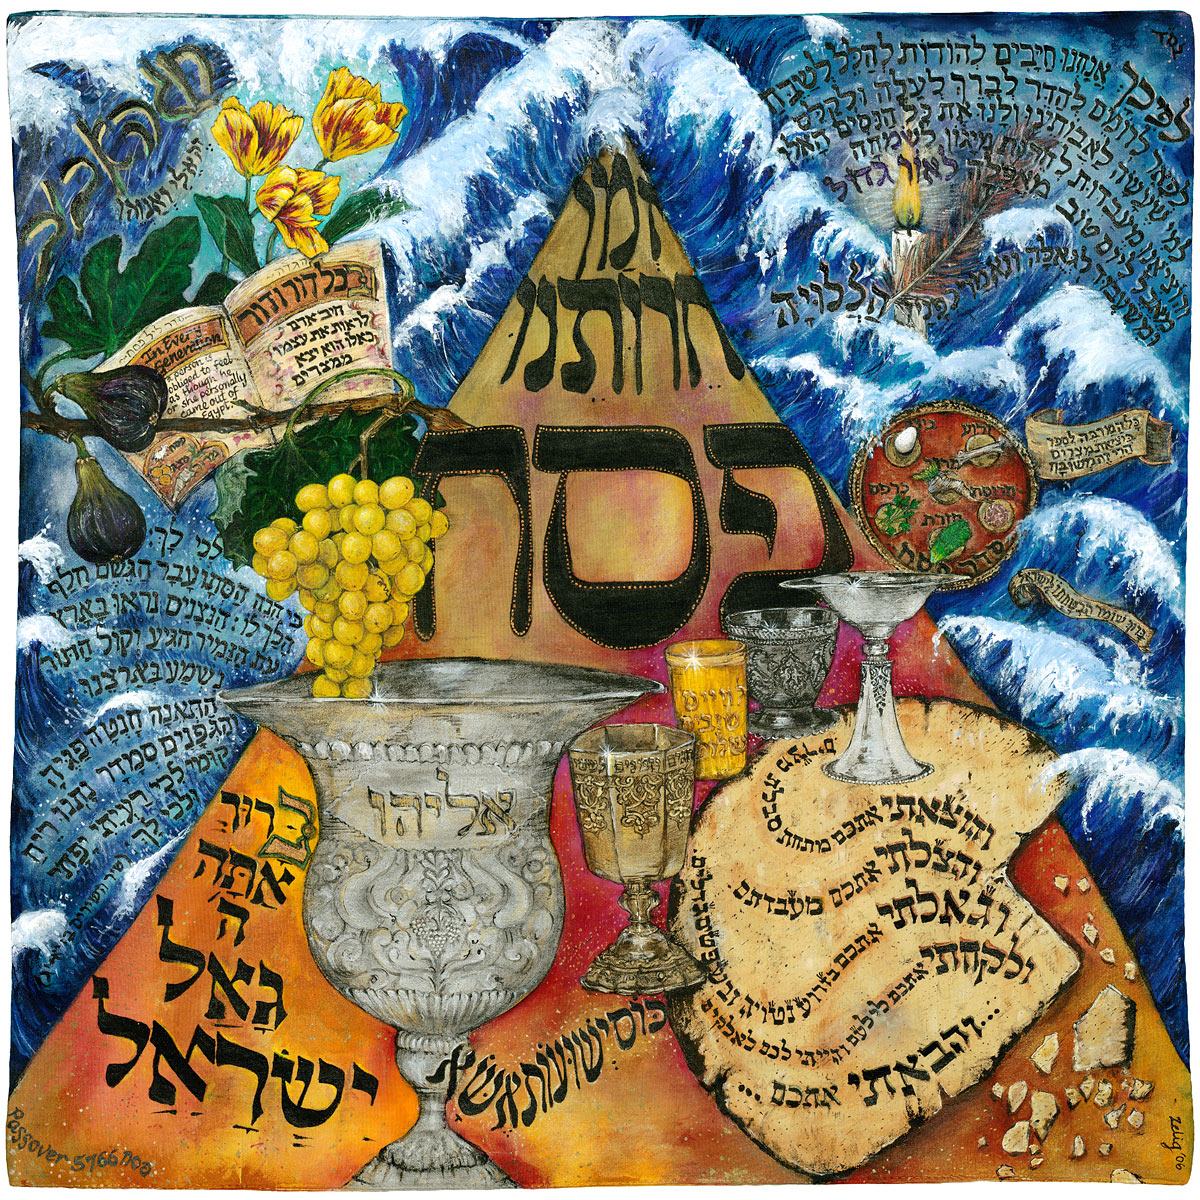 PASSOVER: SPRINGTIME, REDEMPTION AND RENEWAL